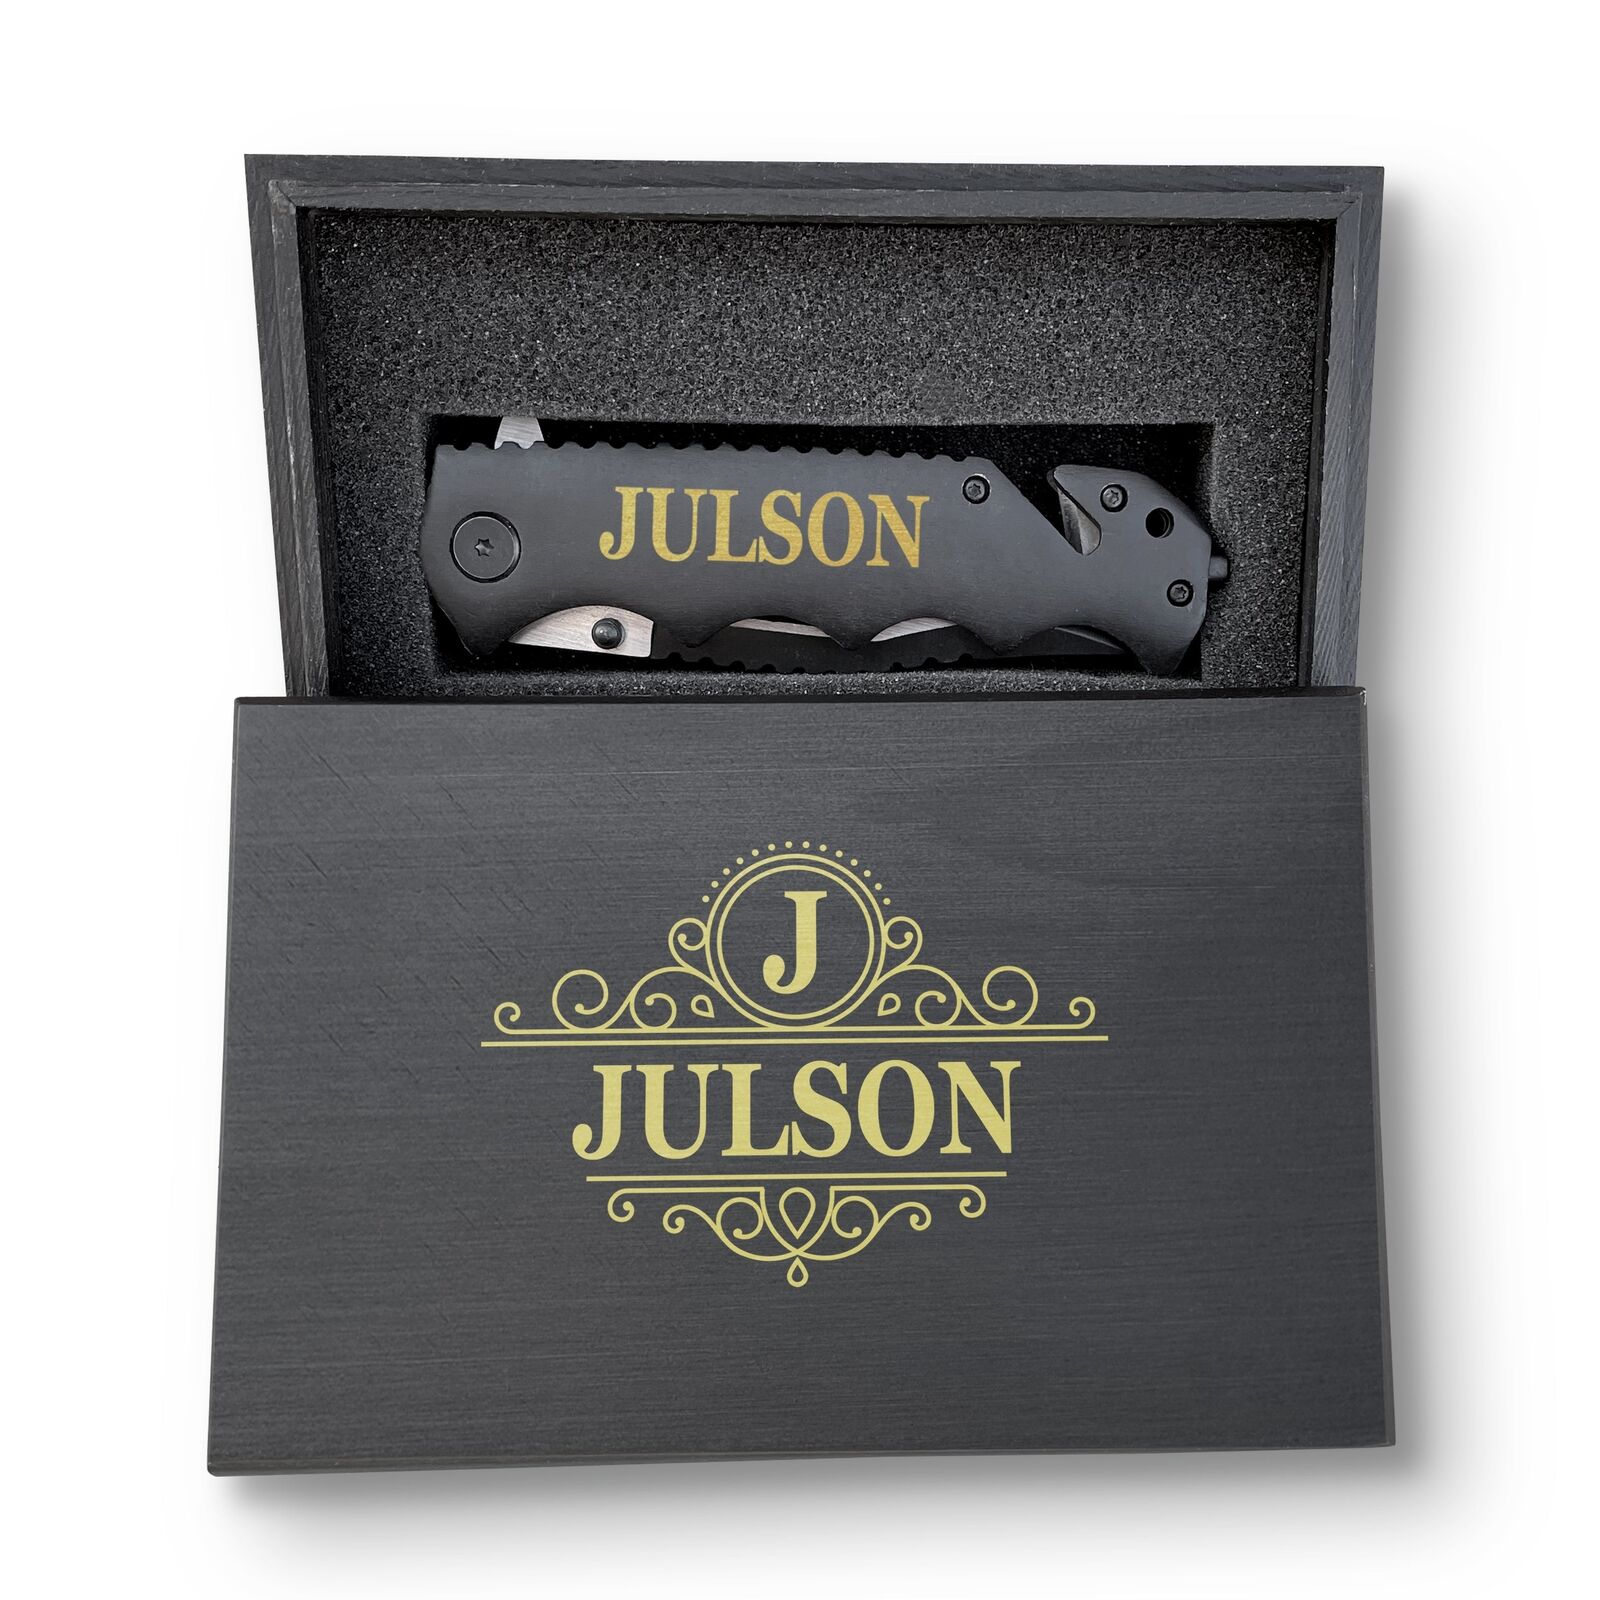 Julson Pocket Safety Knife with Box, Premium Foldable Customized Knife For Safet